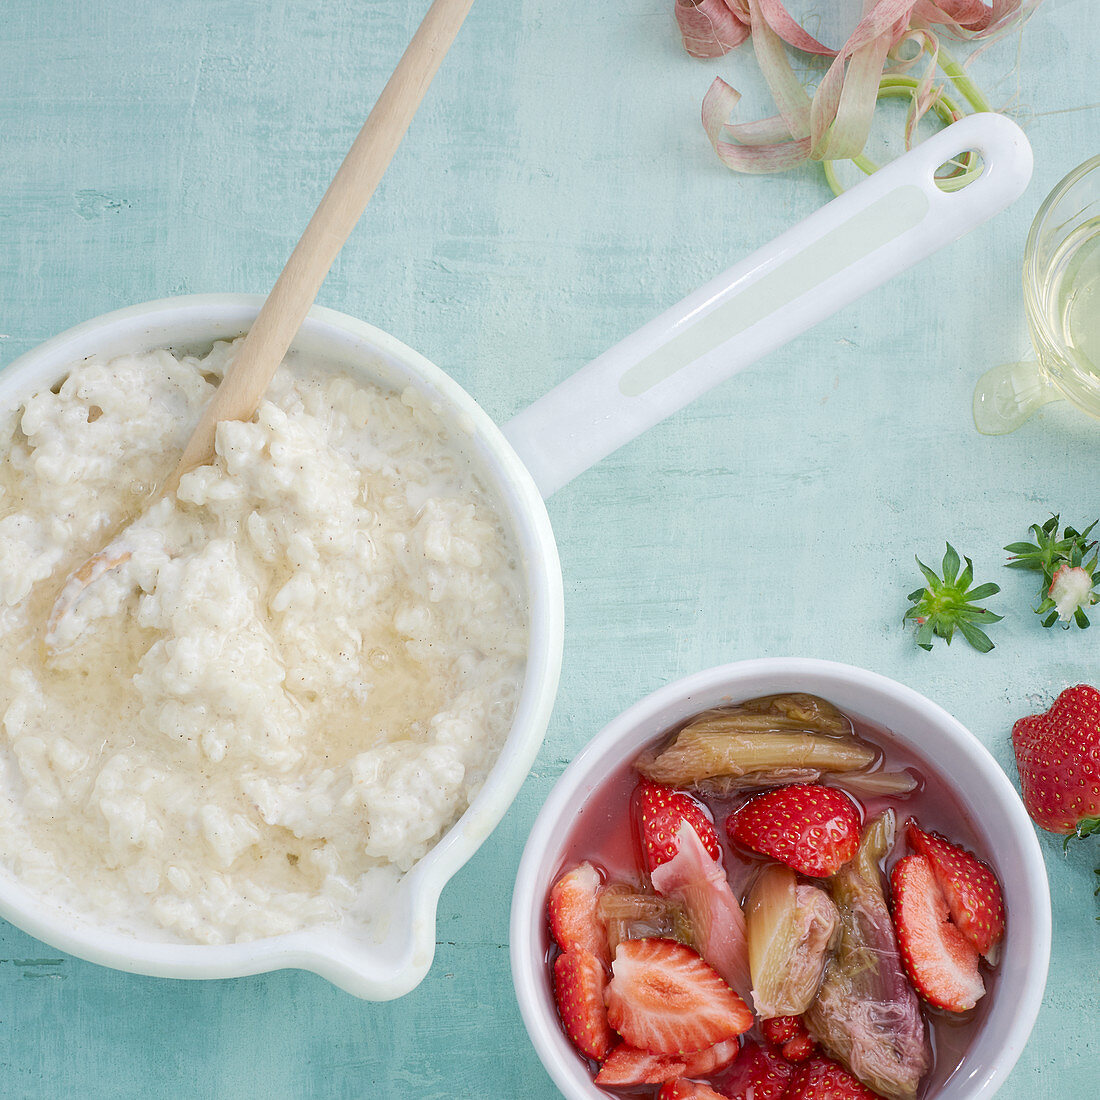 Rice pudding with a strawberry and rhubarb compote